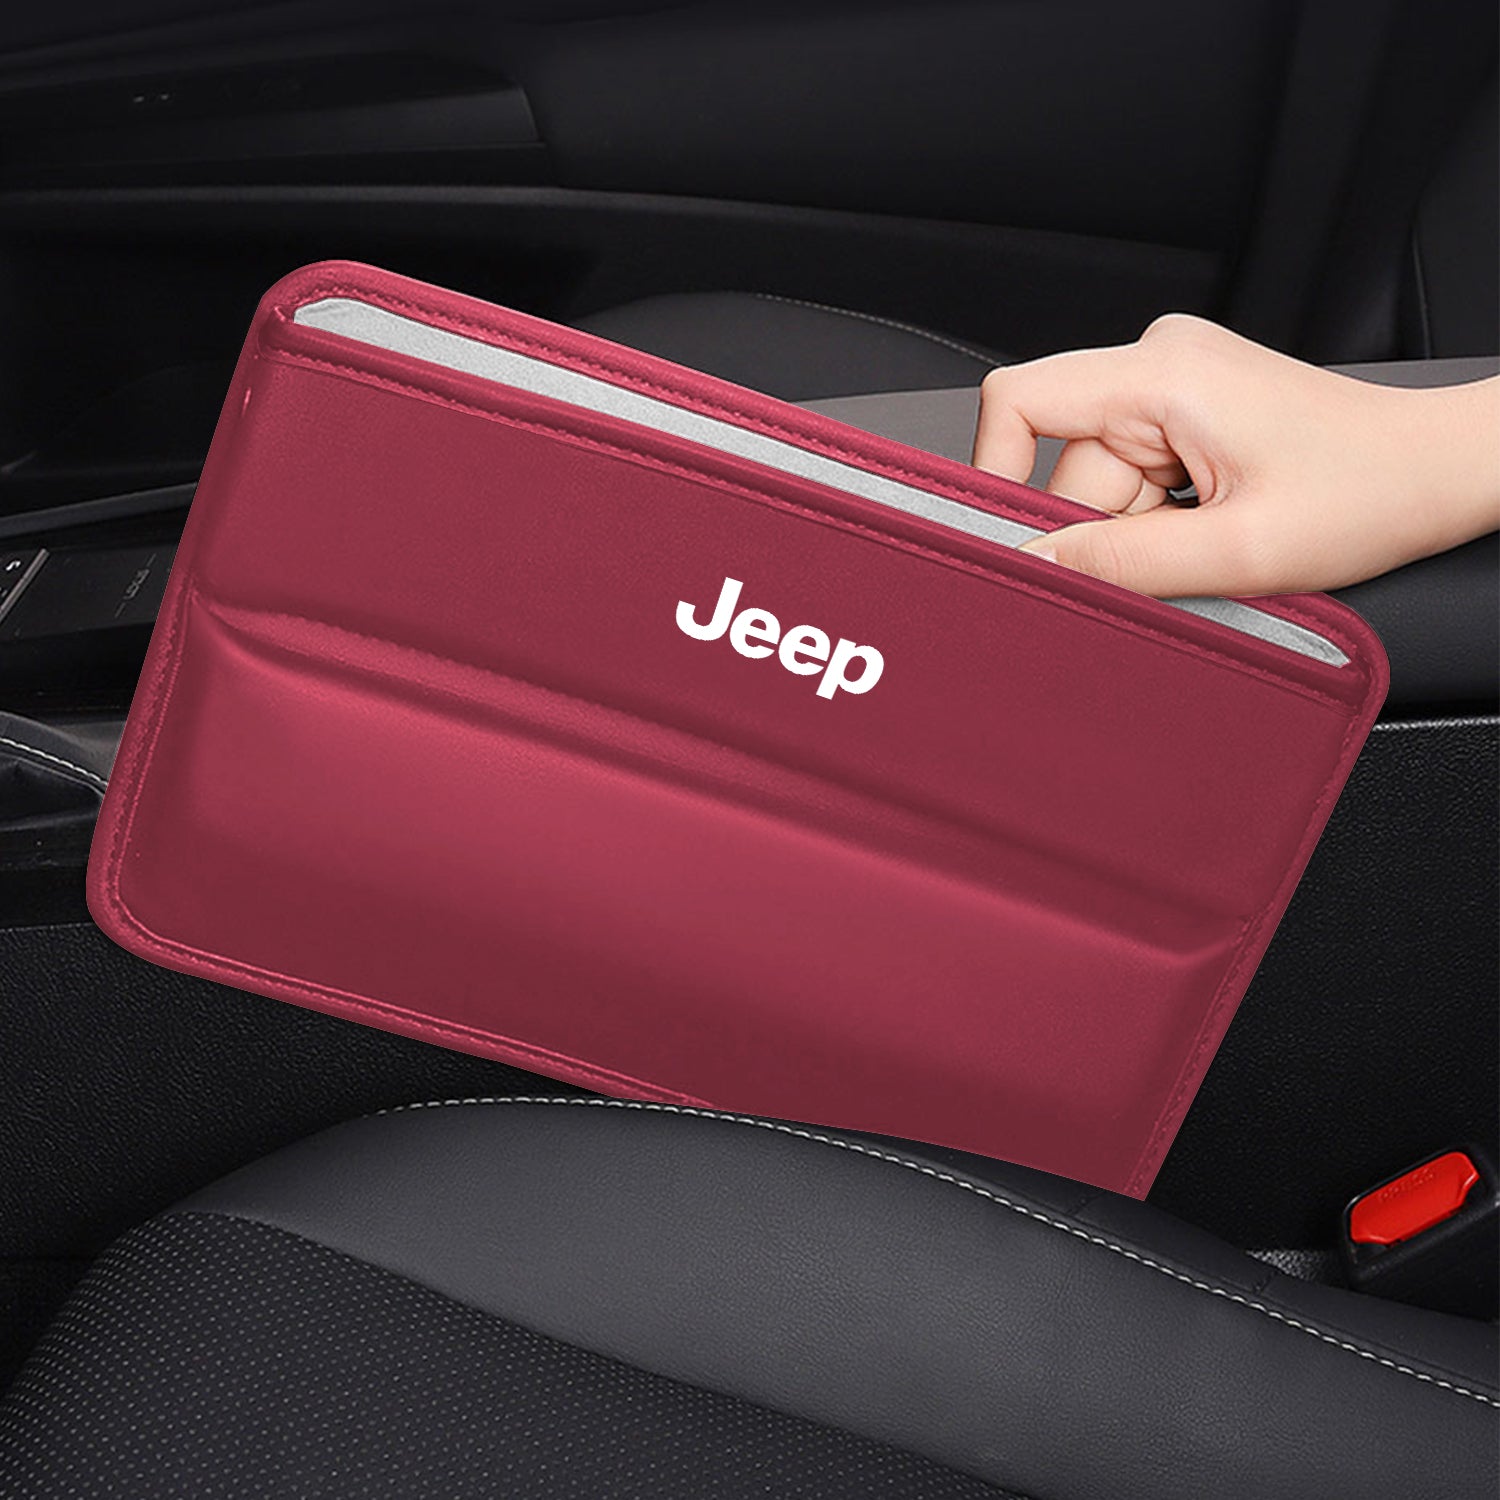 Car Seat Gap Filler Organizer, Custom Fir For Your Cars, Multifunctional PU Leather Console Side Pocket Organizer for Cellphones, Cards, Wallets, Keys - Delicate Leather